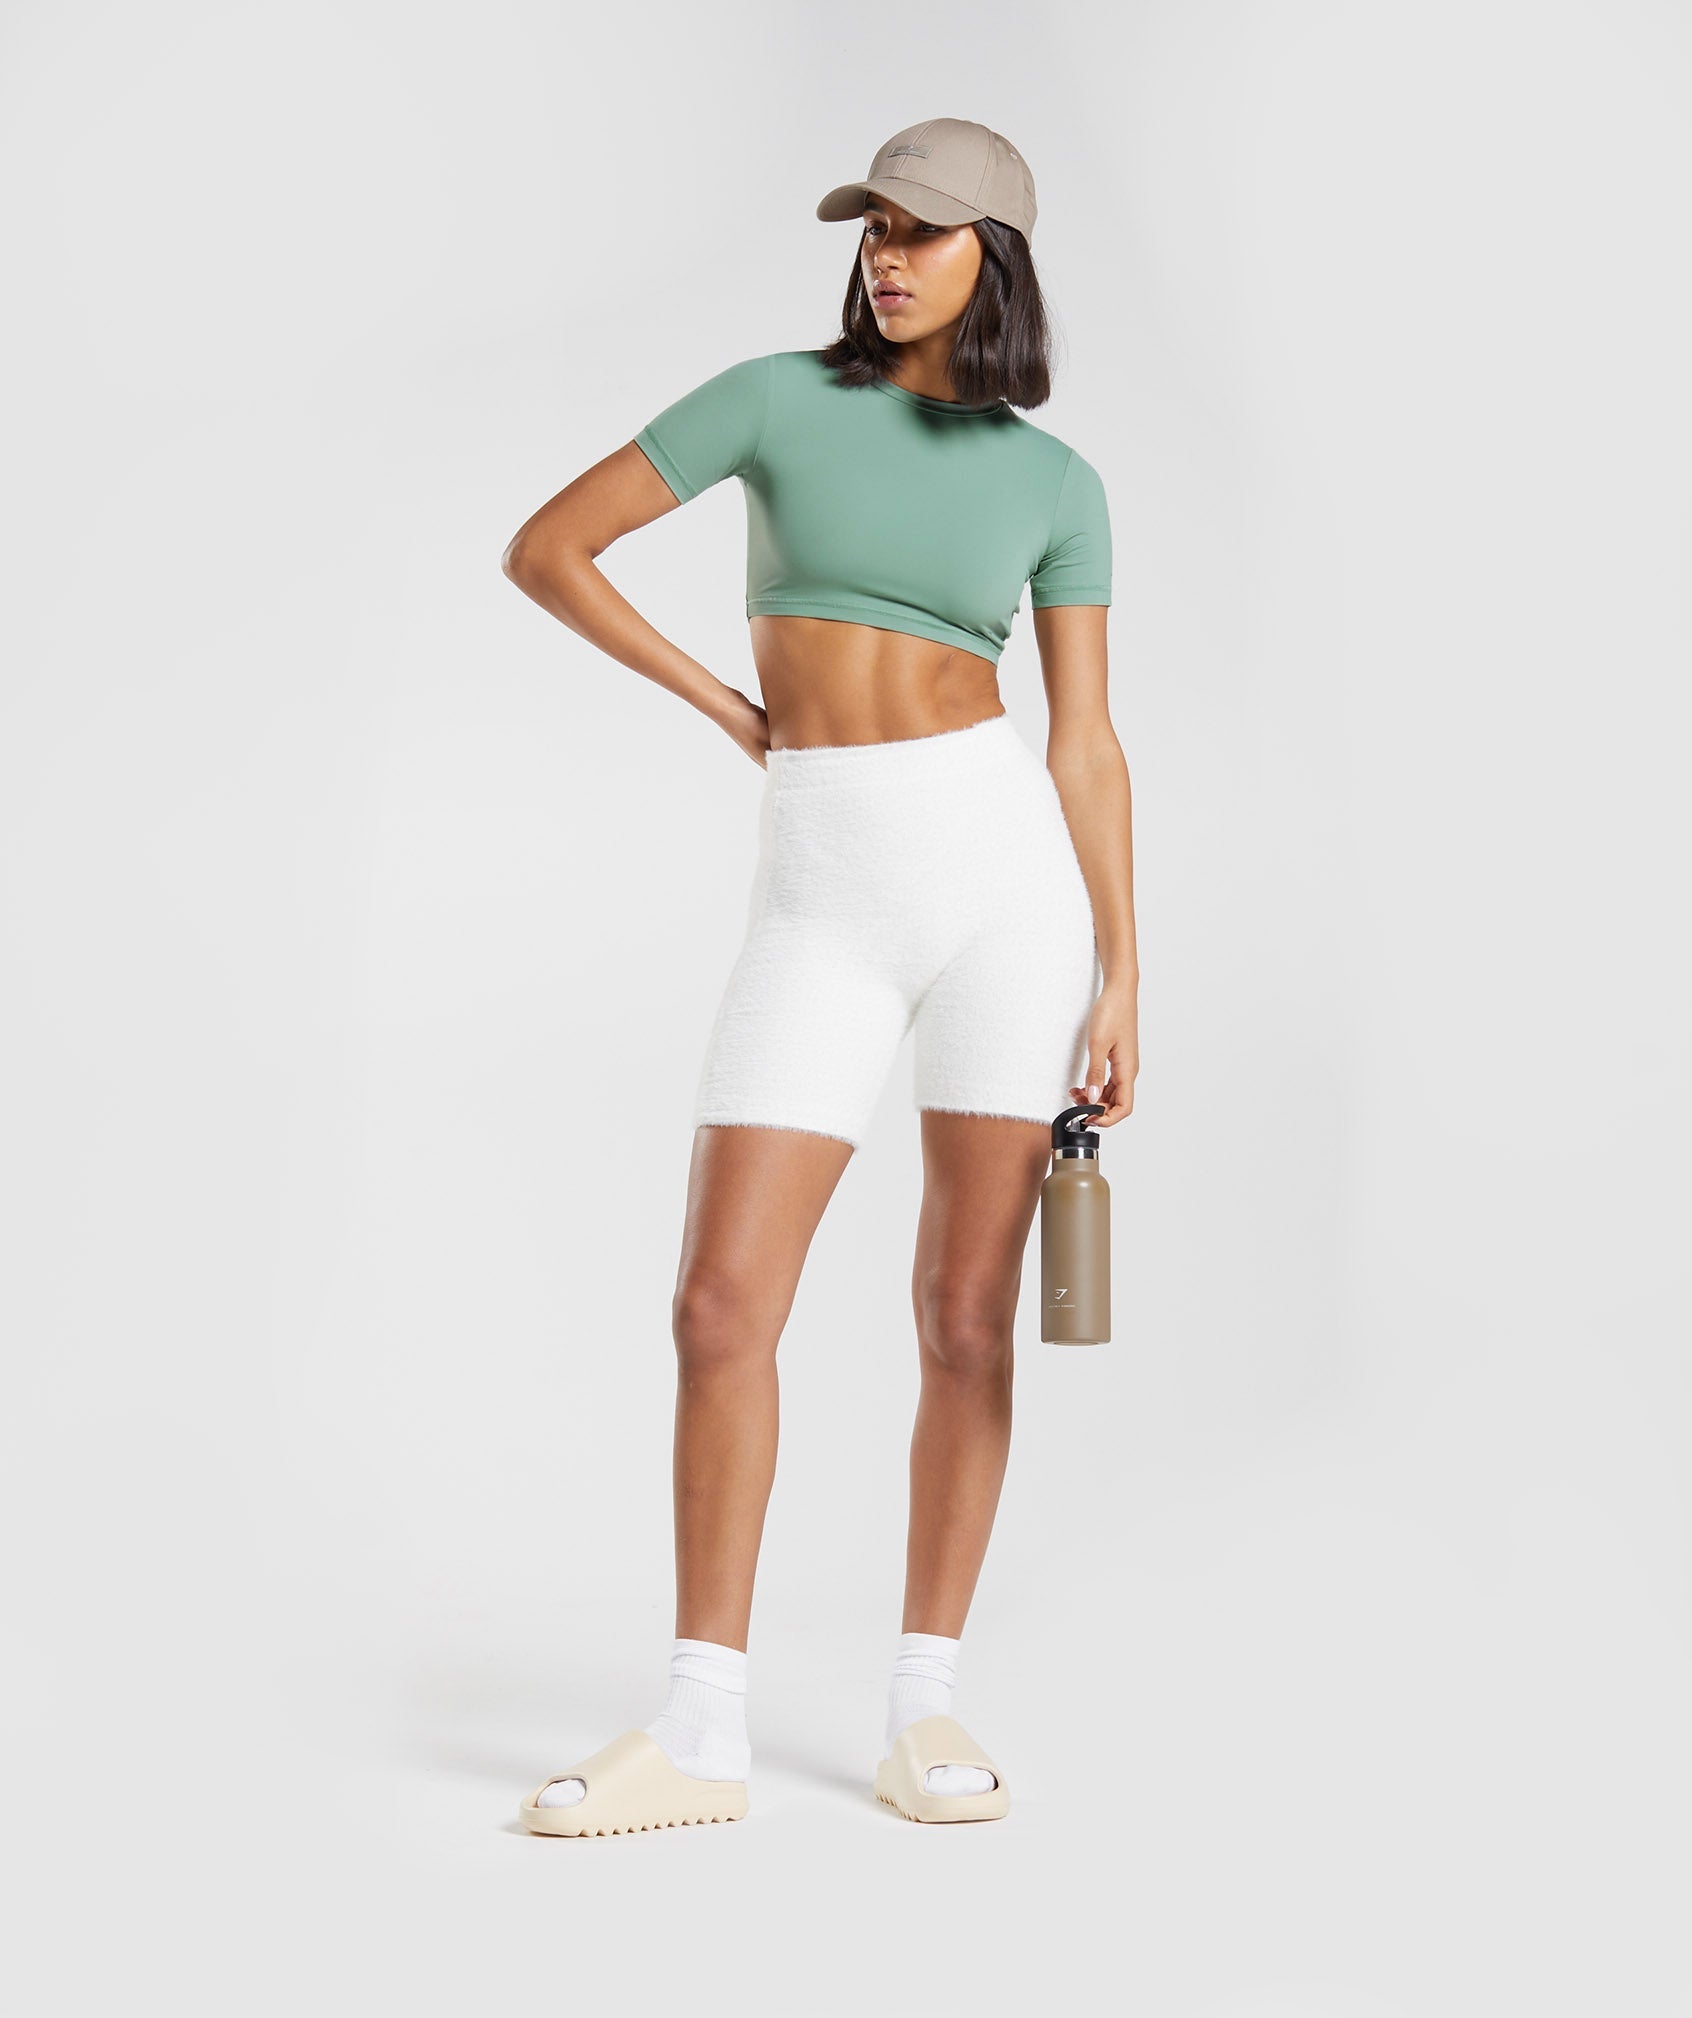 Whitney Short Sleeve Crop Top in Leaf Green - view 4